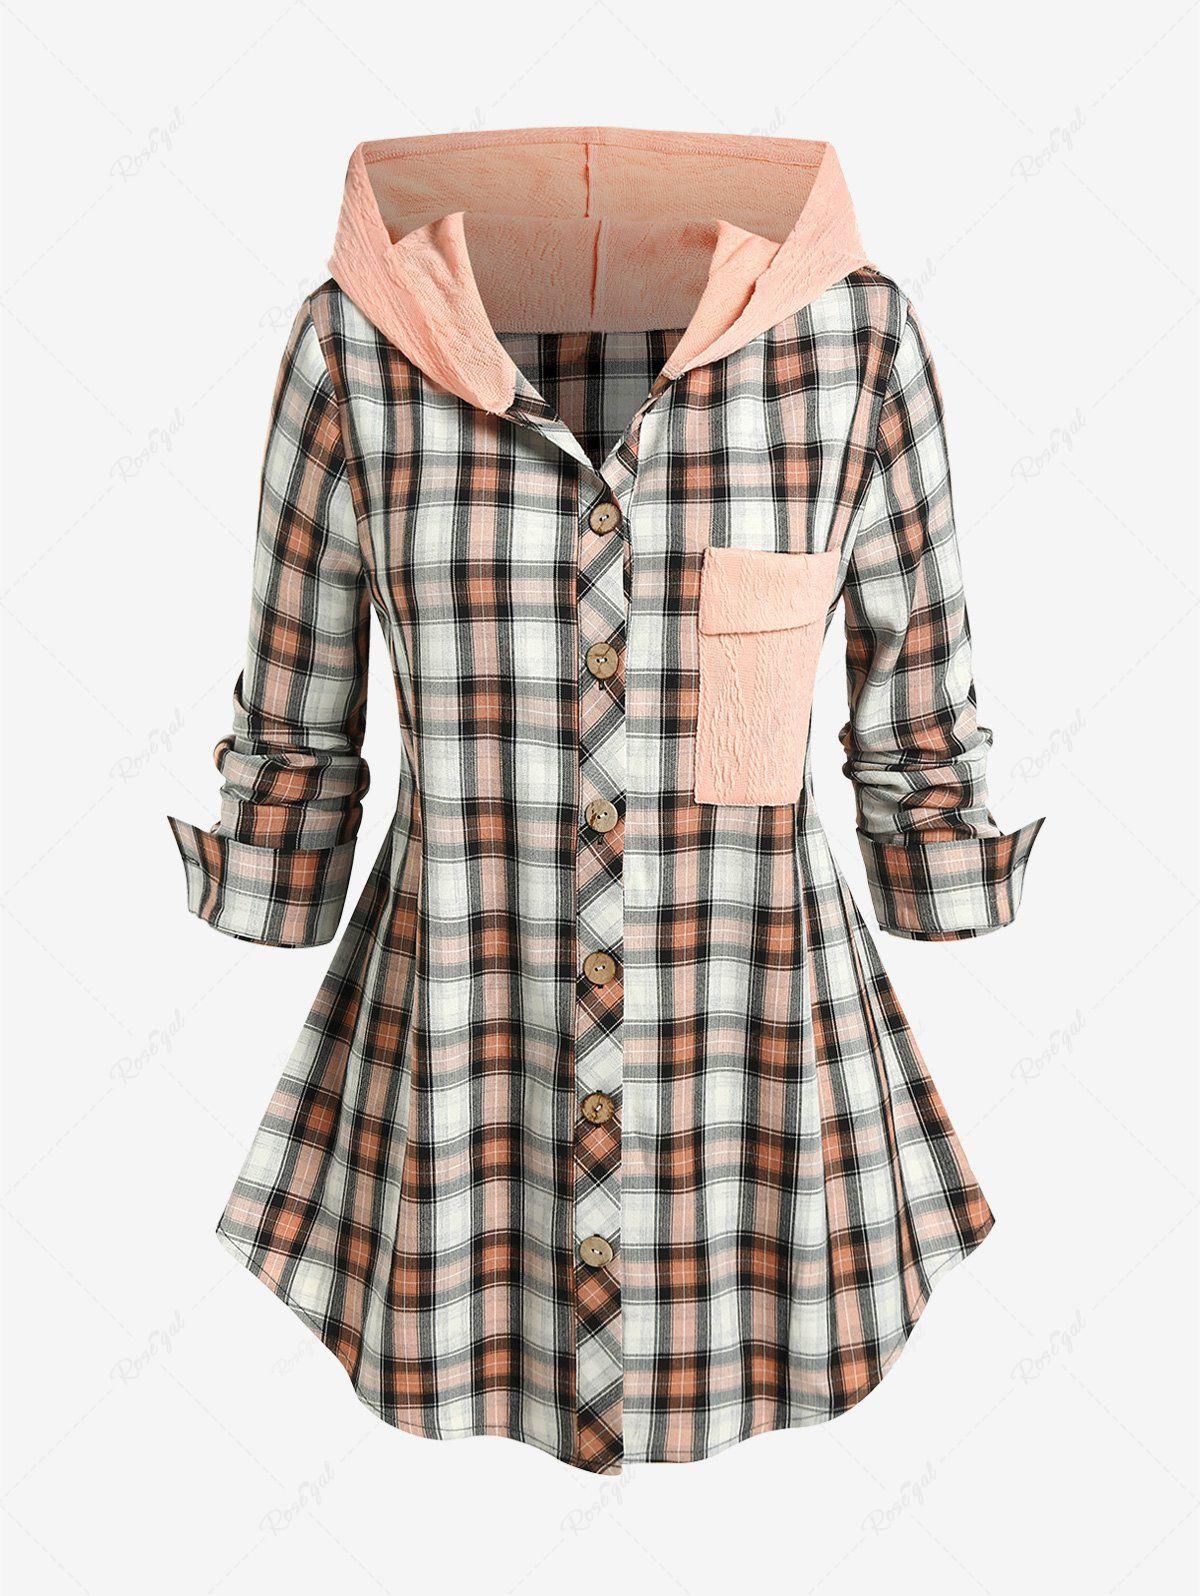 Plus Size Plaid Colorblock Textured Hooded Shirt with Pocket - 1x | Us 14-16